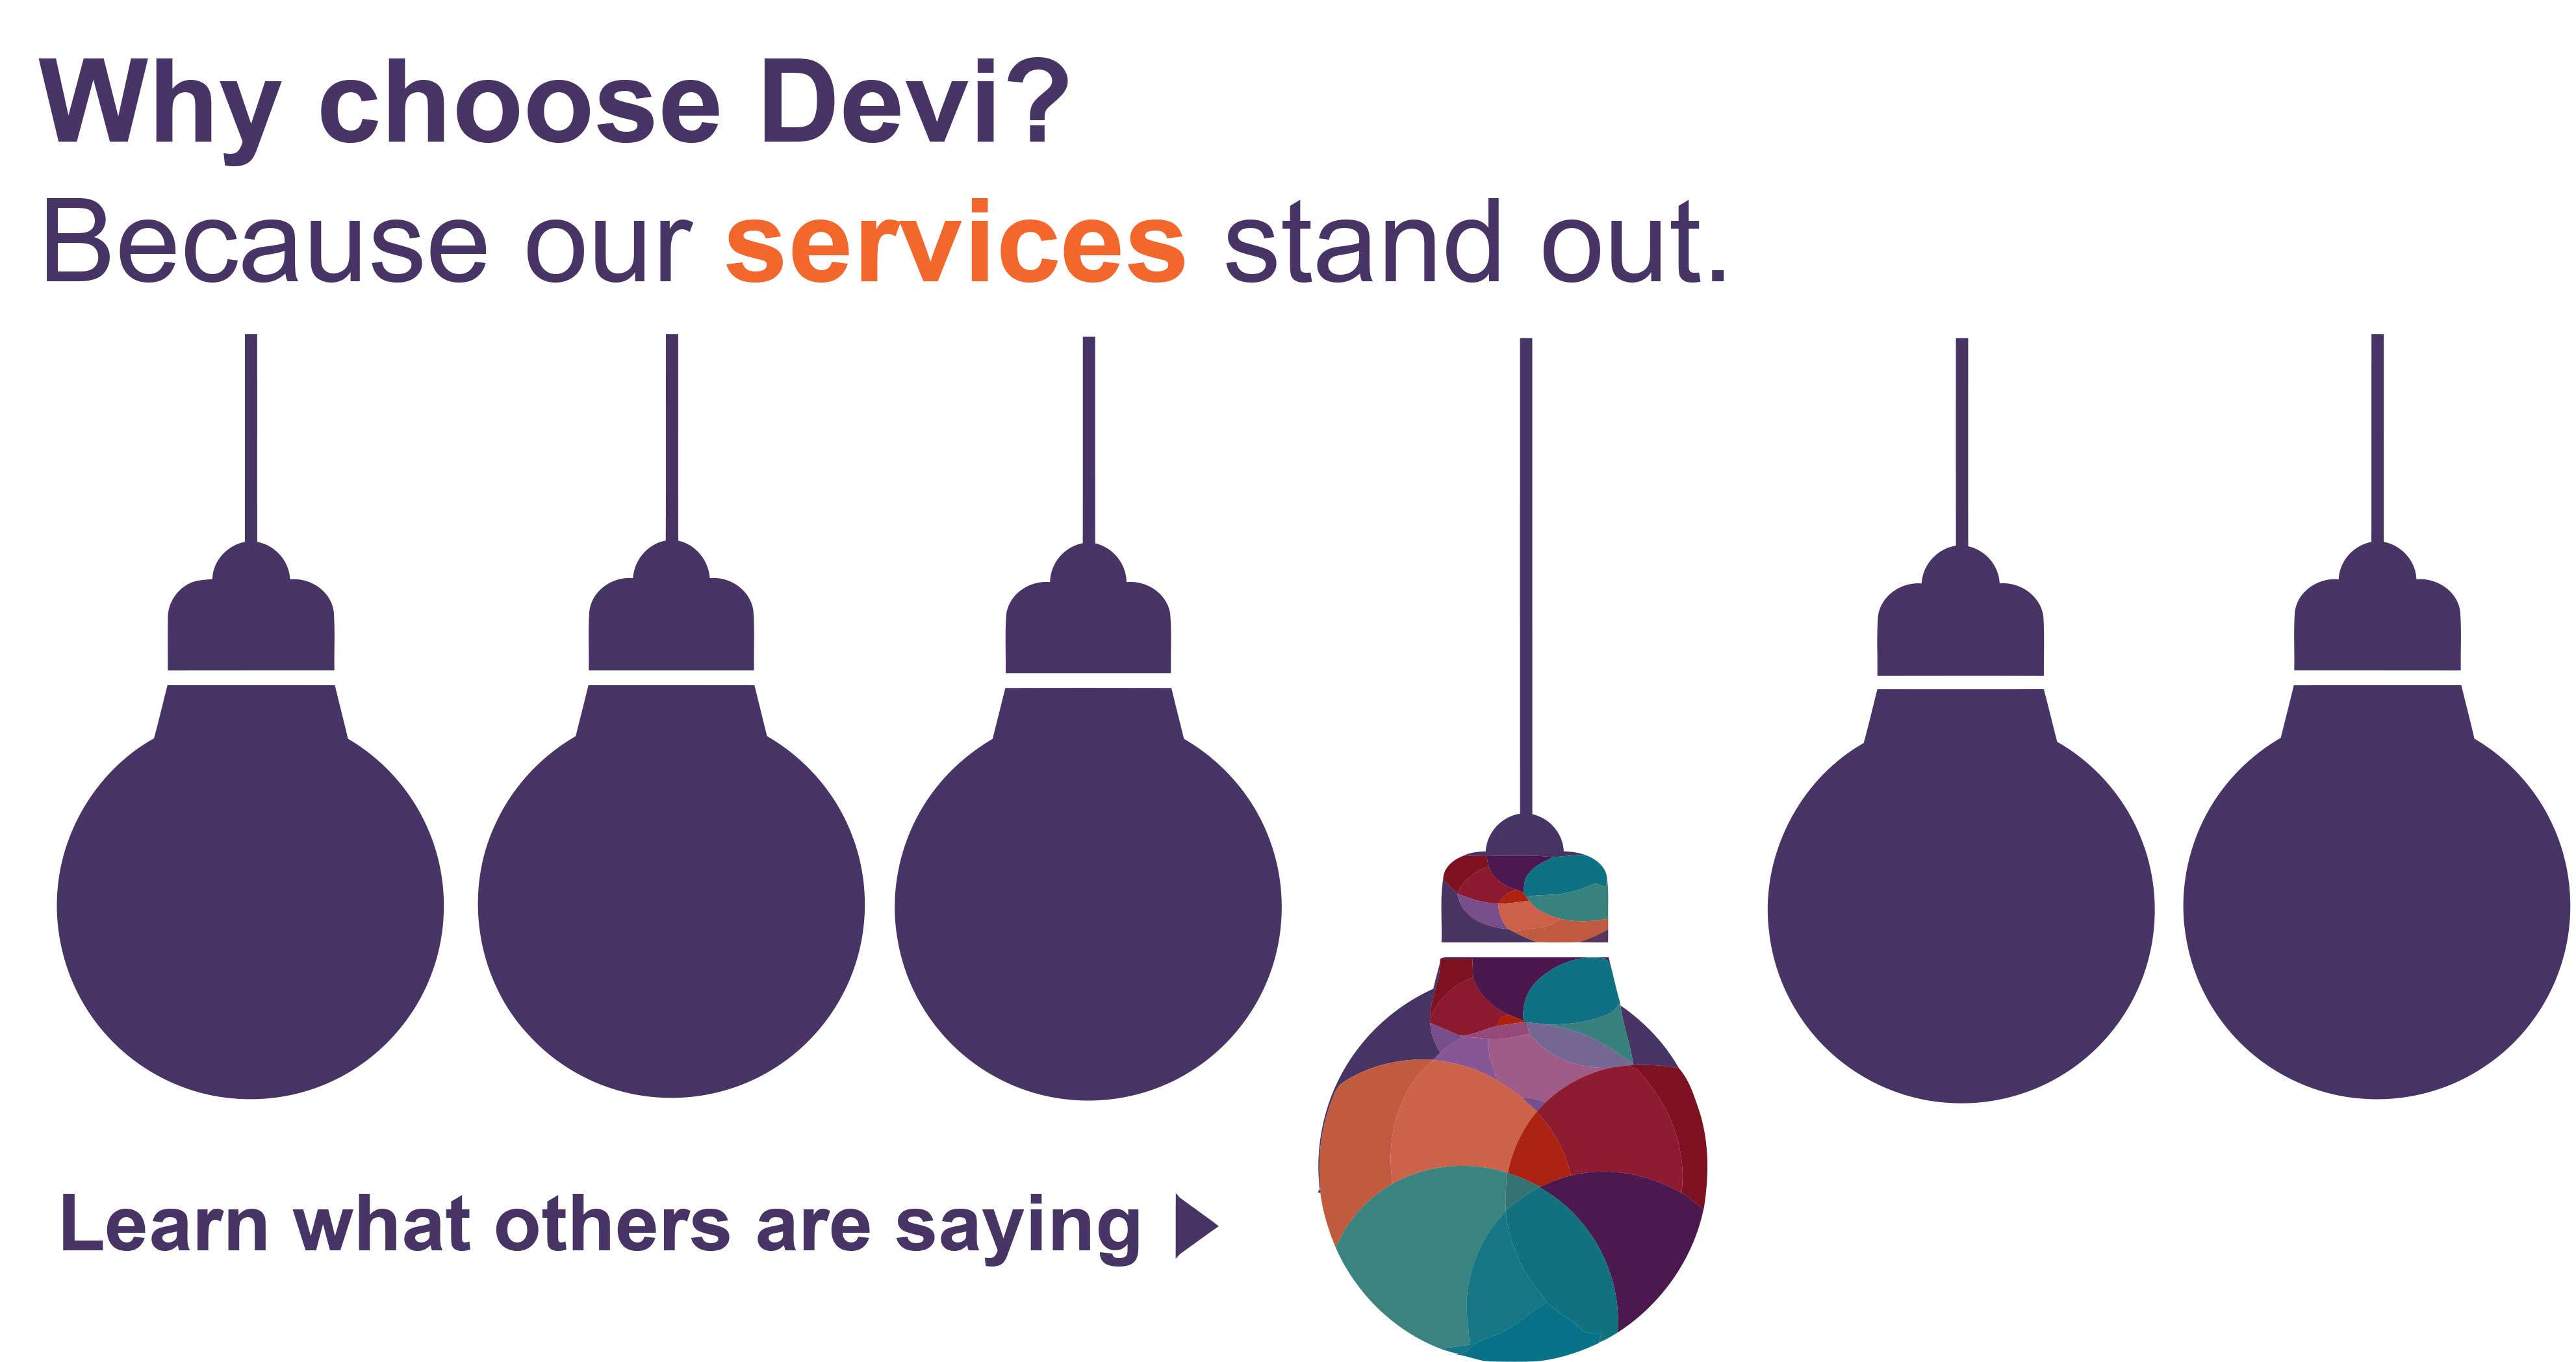 Why choose Devi? Because our services stand out.